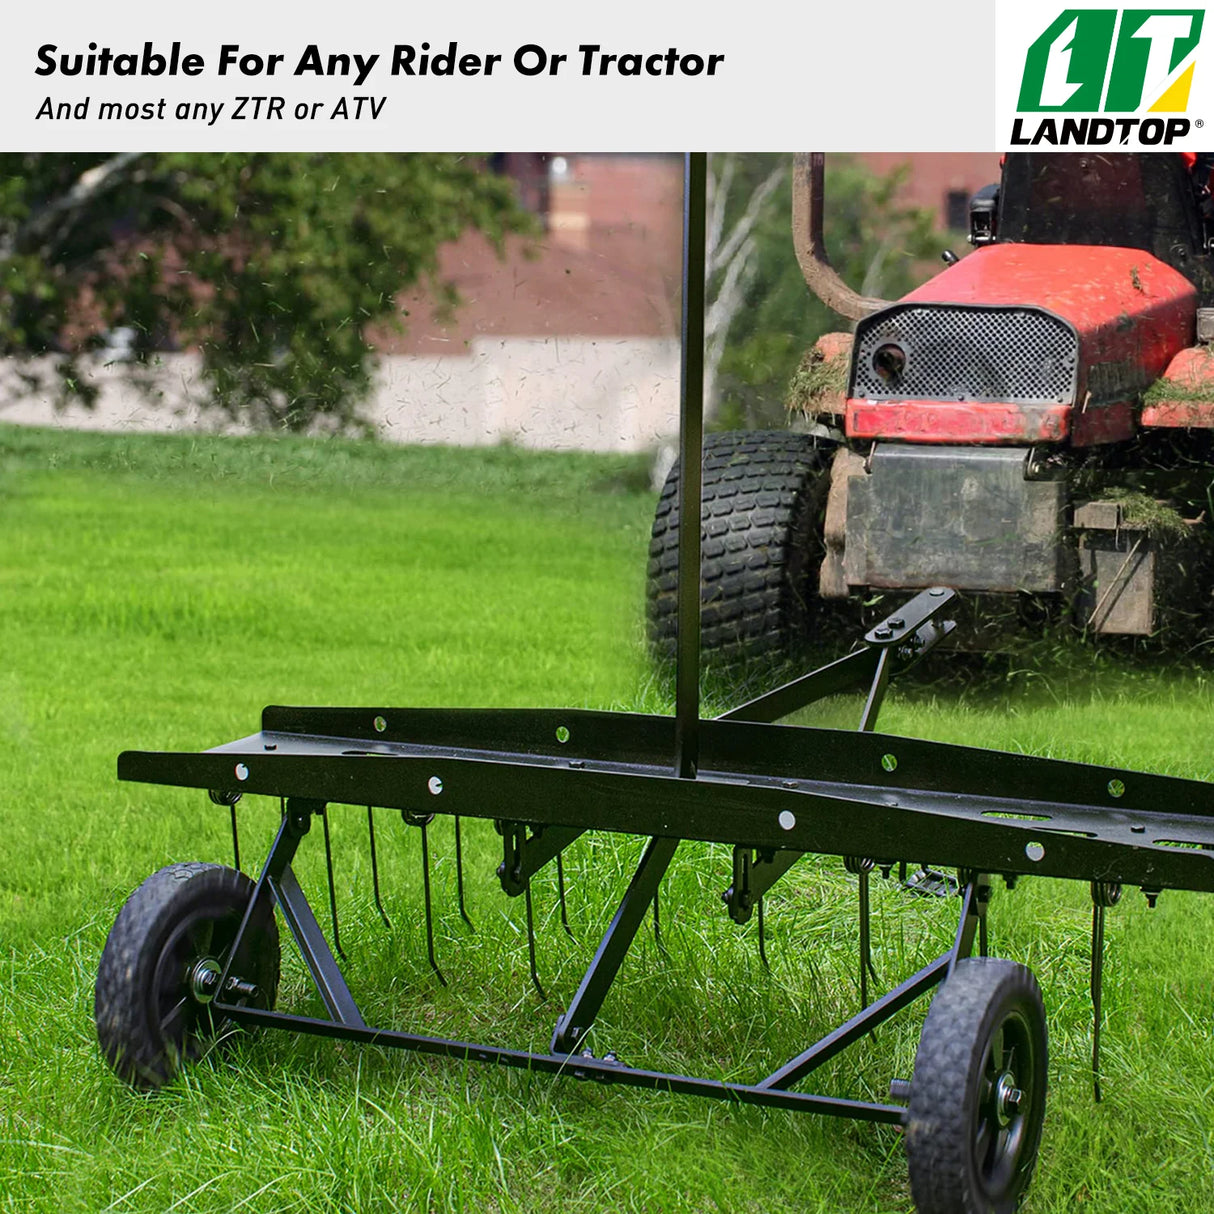 40inch Tow Behind Dethatcher with 20 Spring Steel Tines,Lawn Sweeper Garden Grass Tractor Rake Removes Thatch from Large Lawns, Riding Lawn Mower Attachments for Outdoor Yard Tools Lawn Care